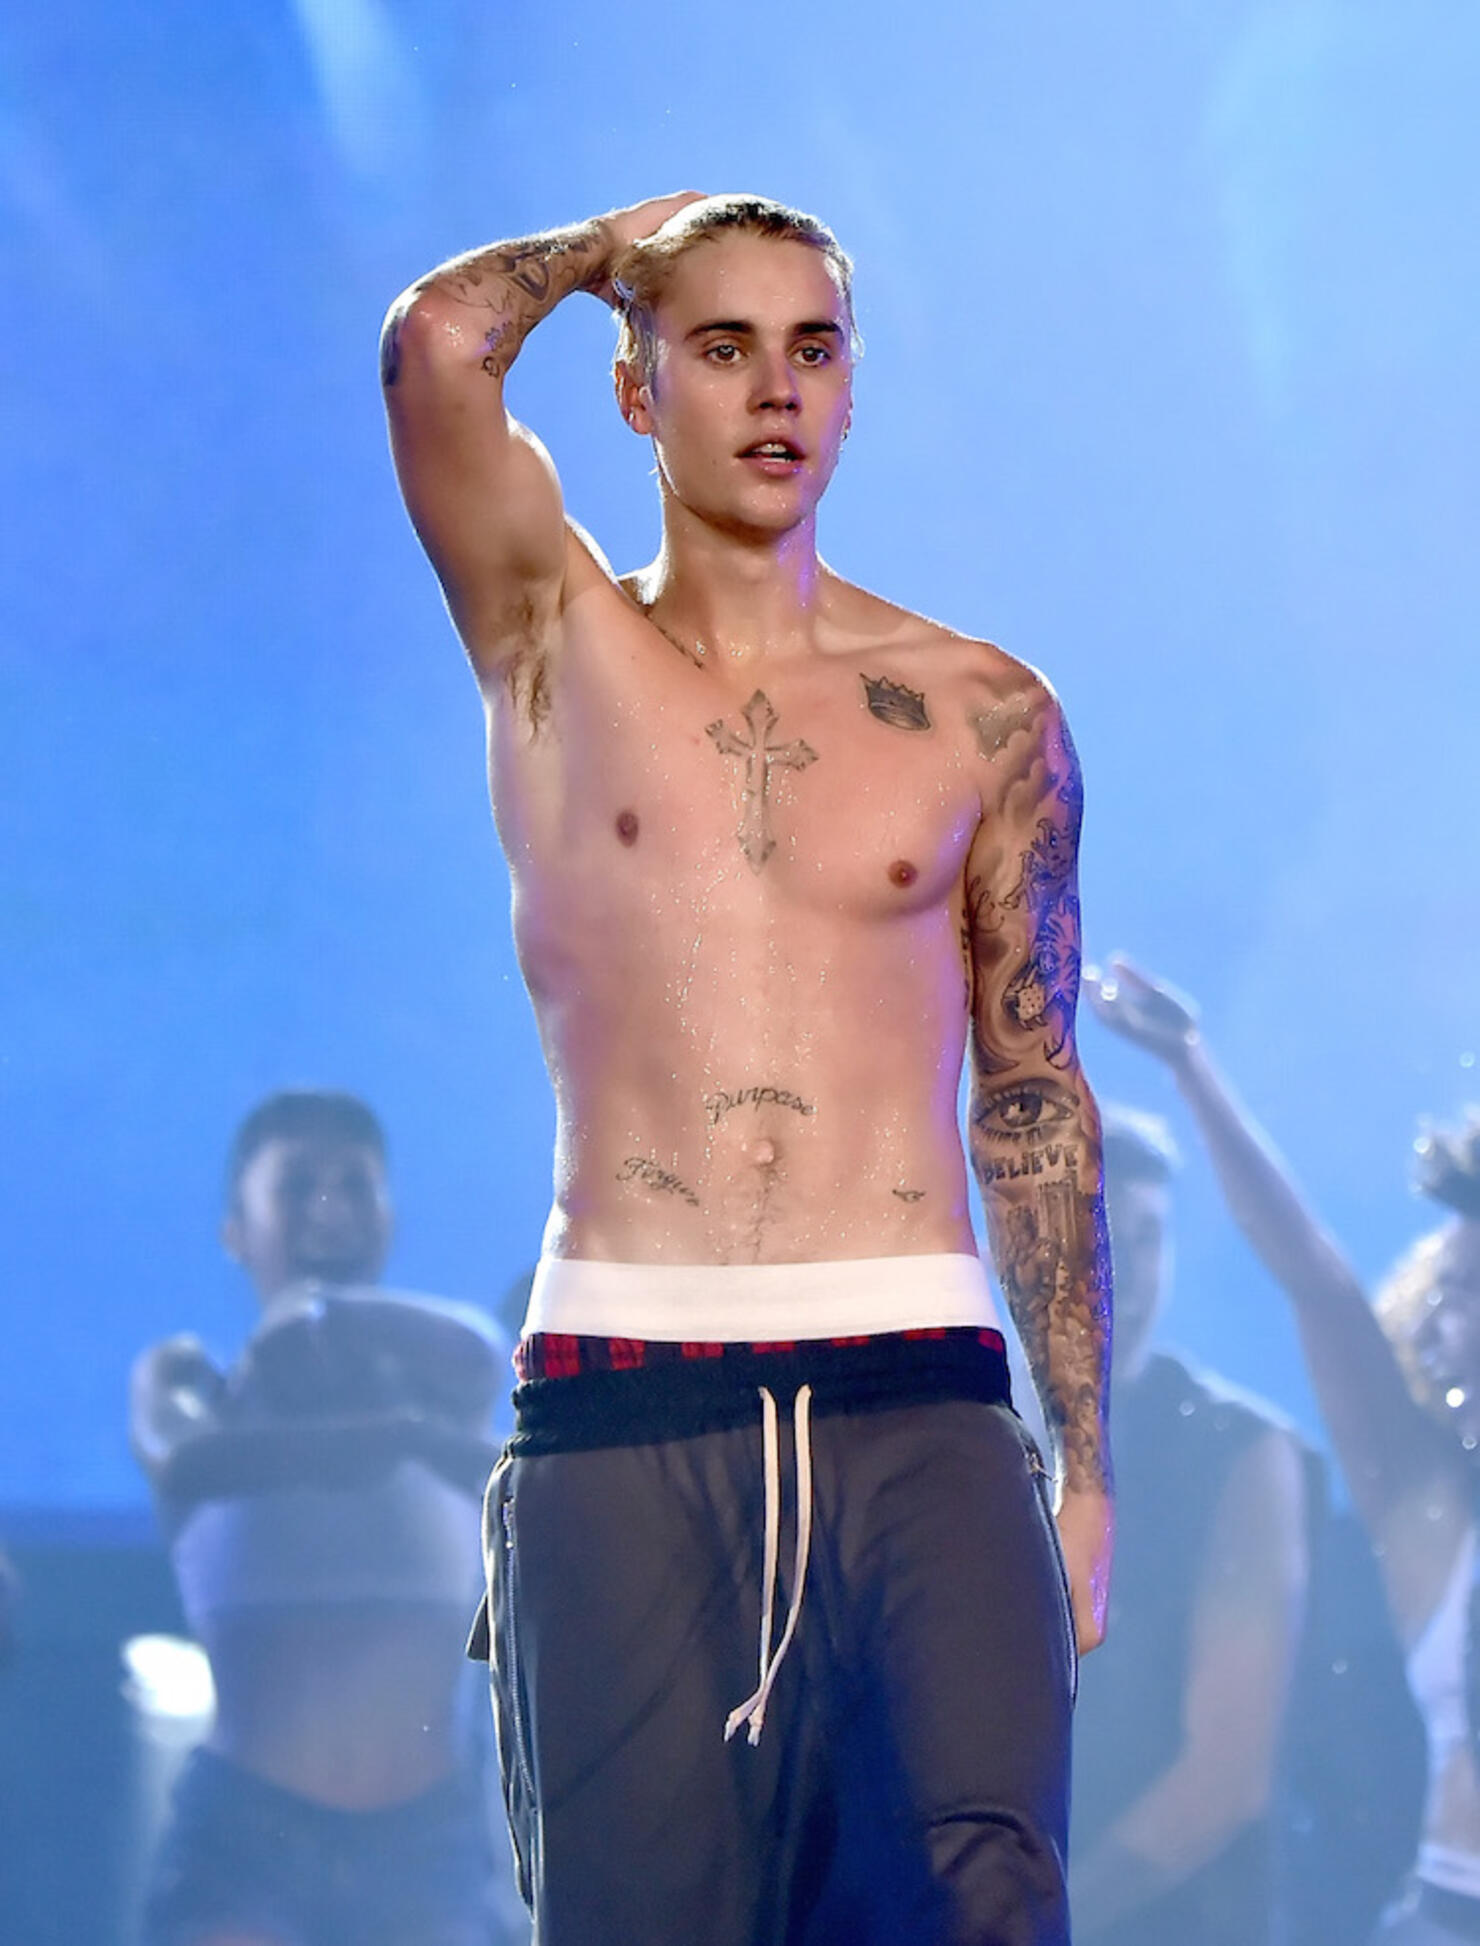 Justin Bieber Got A New Tattoo Right Above His Abs (PHOTO) | iHeart